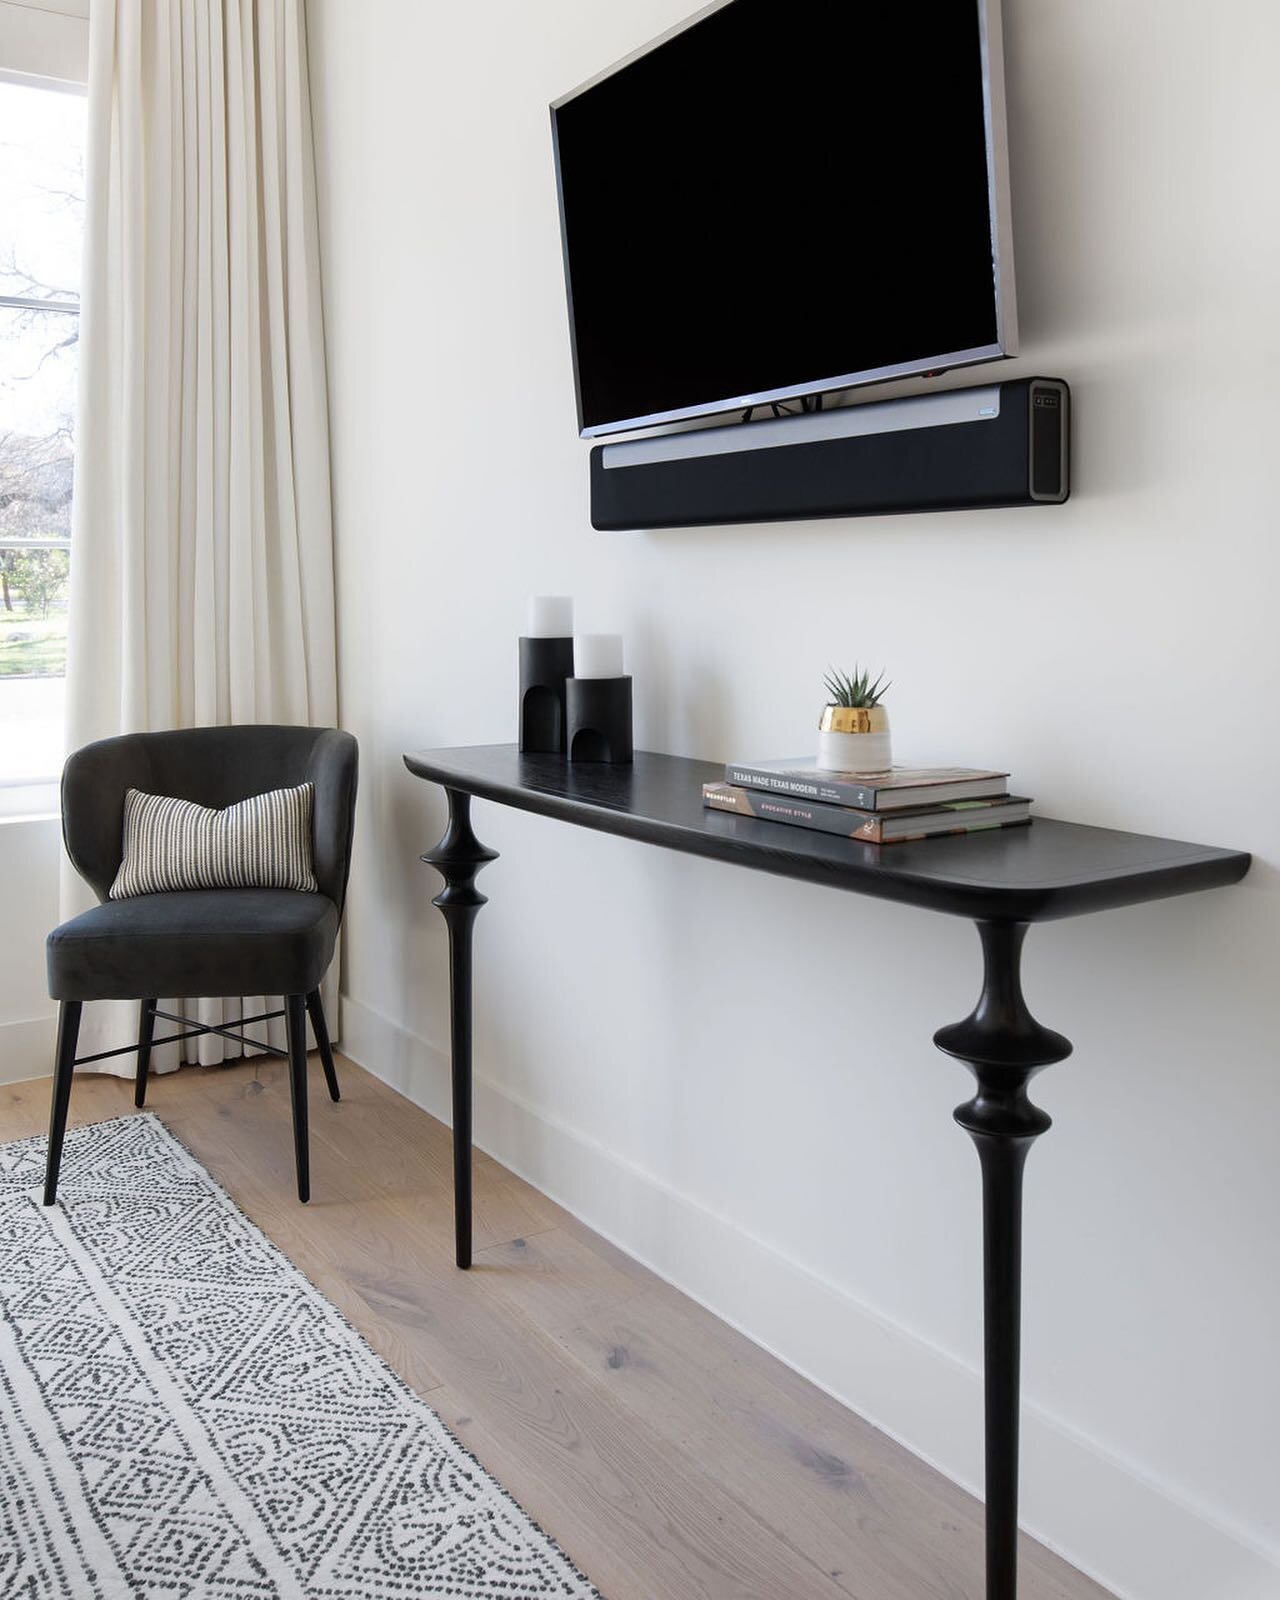 Sometimes two legs are better than four. This wall mounted console was the perfect fit, allowing more walk space in front of the bed while also serving as a functional piece to anchor the wall mounted TV so it didn&rsquo;t look &ldquo;floating&rdquo;